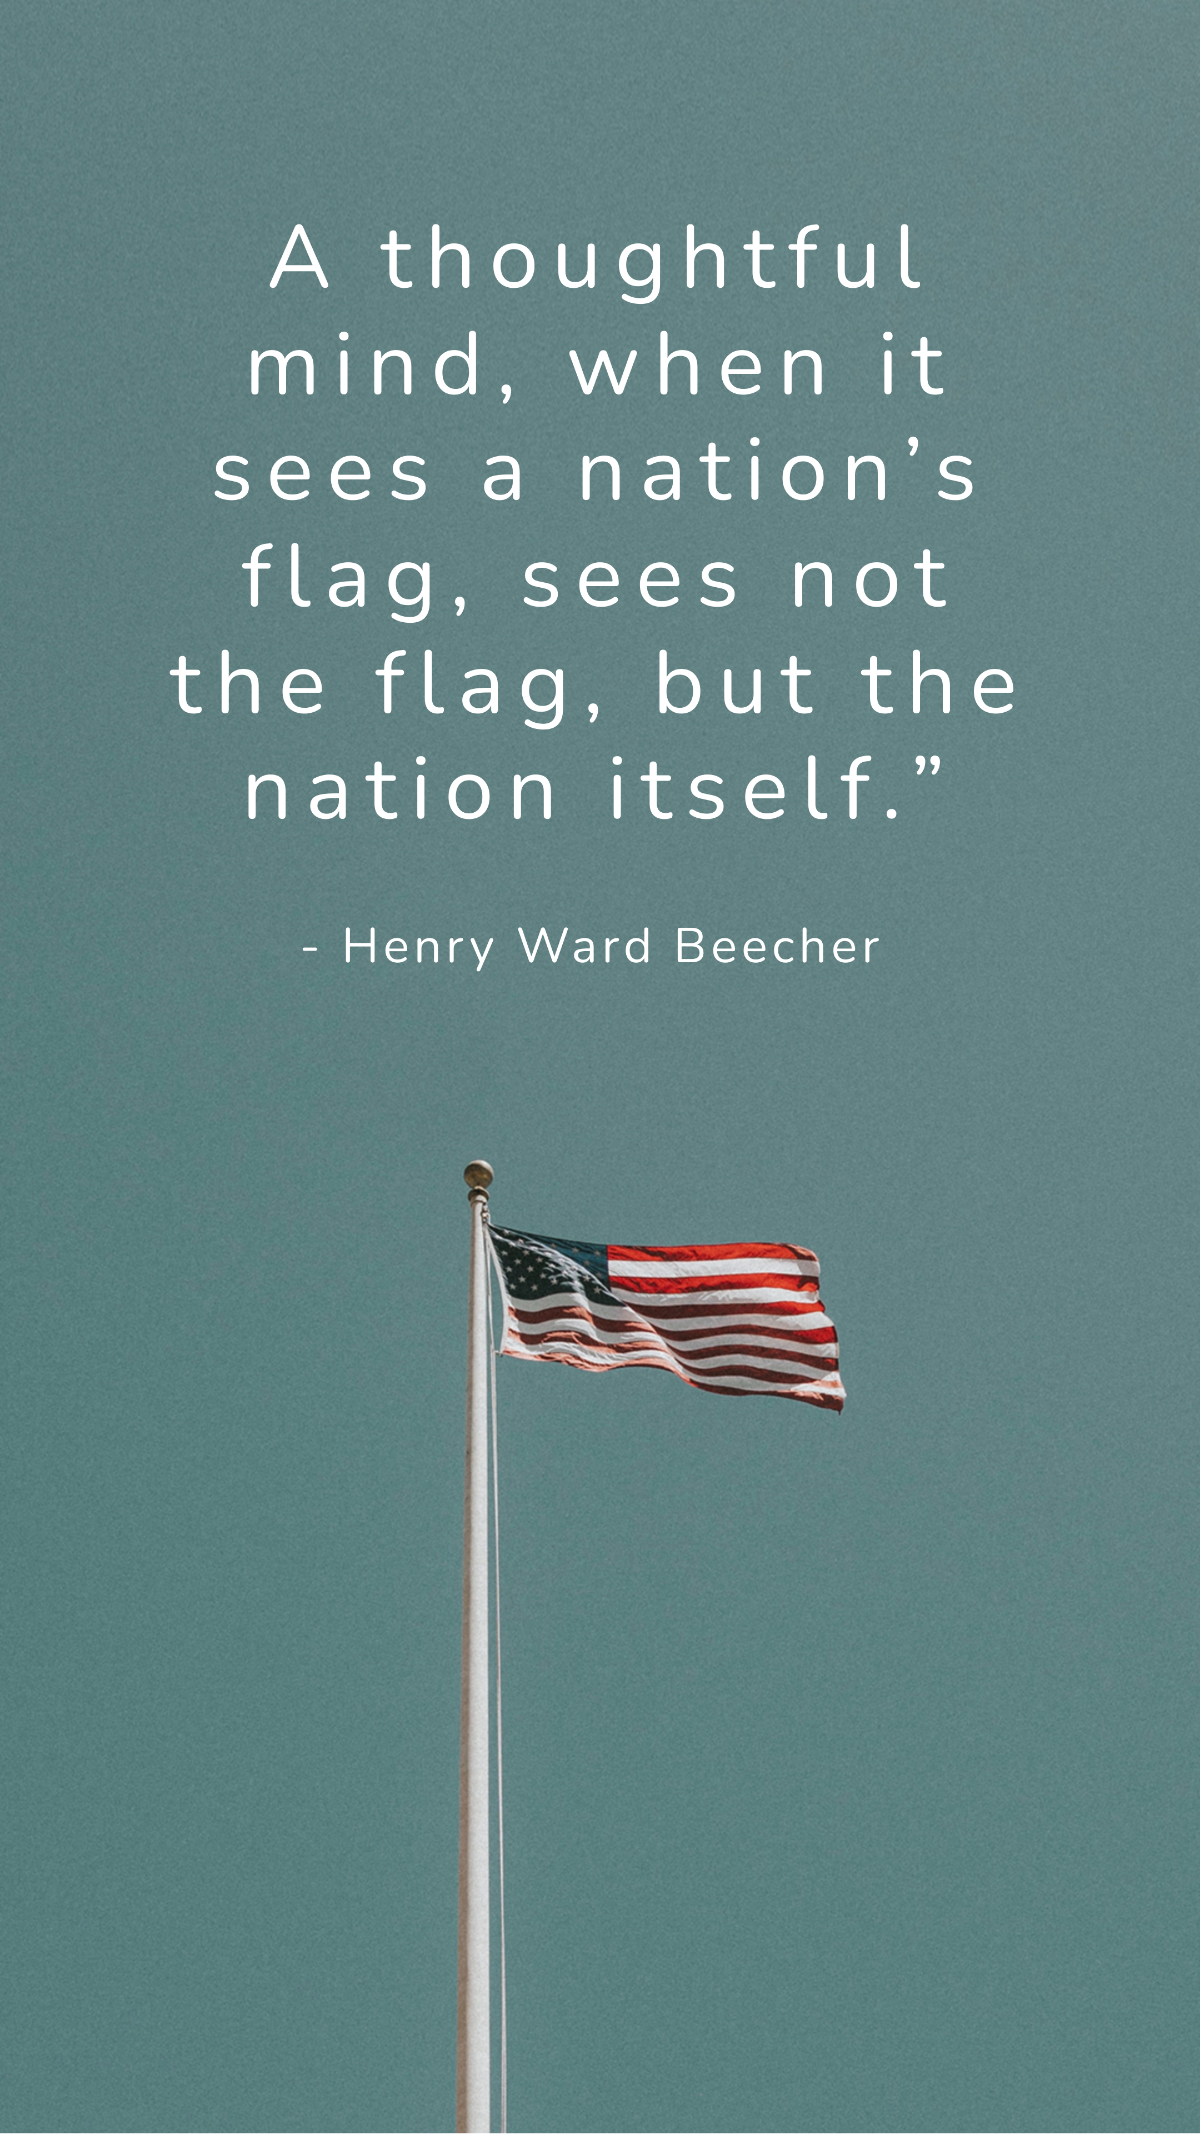 Free Henry Ward Beecher - A thoughtful mind, when it sees a nation’s flag, sees not the flag, but the nation itself.” Template